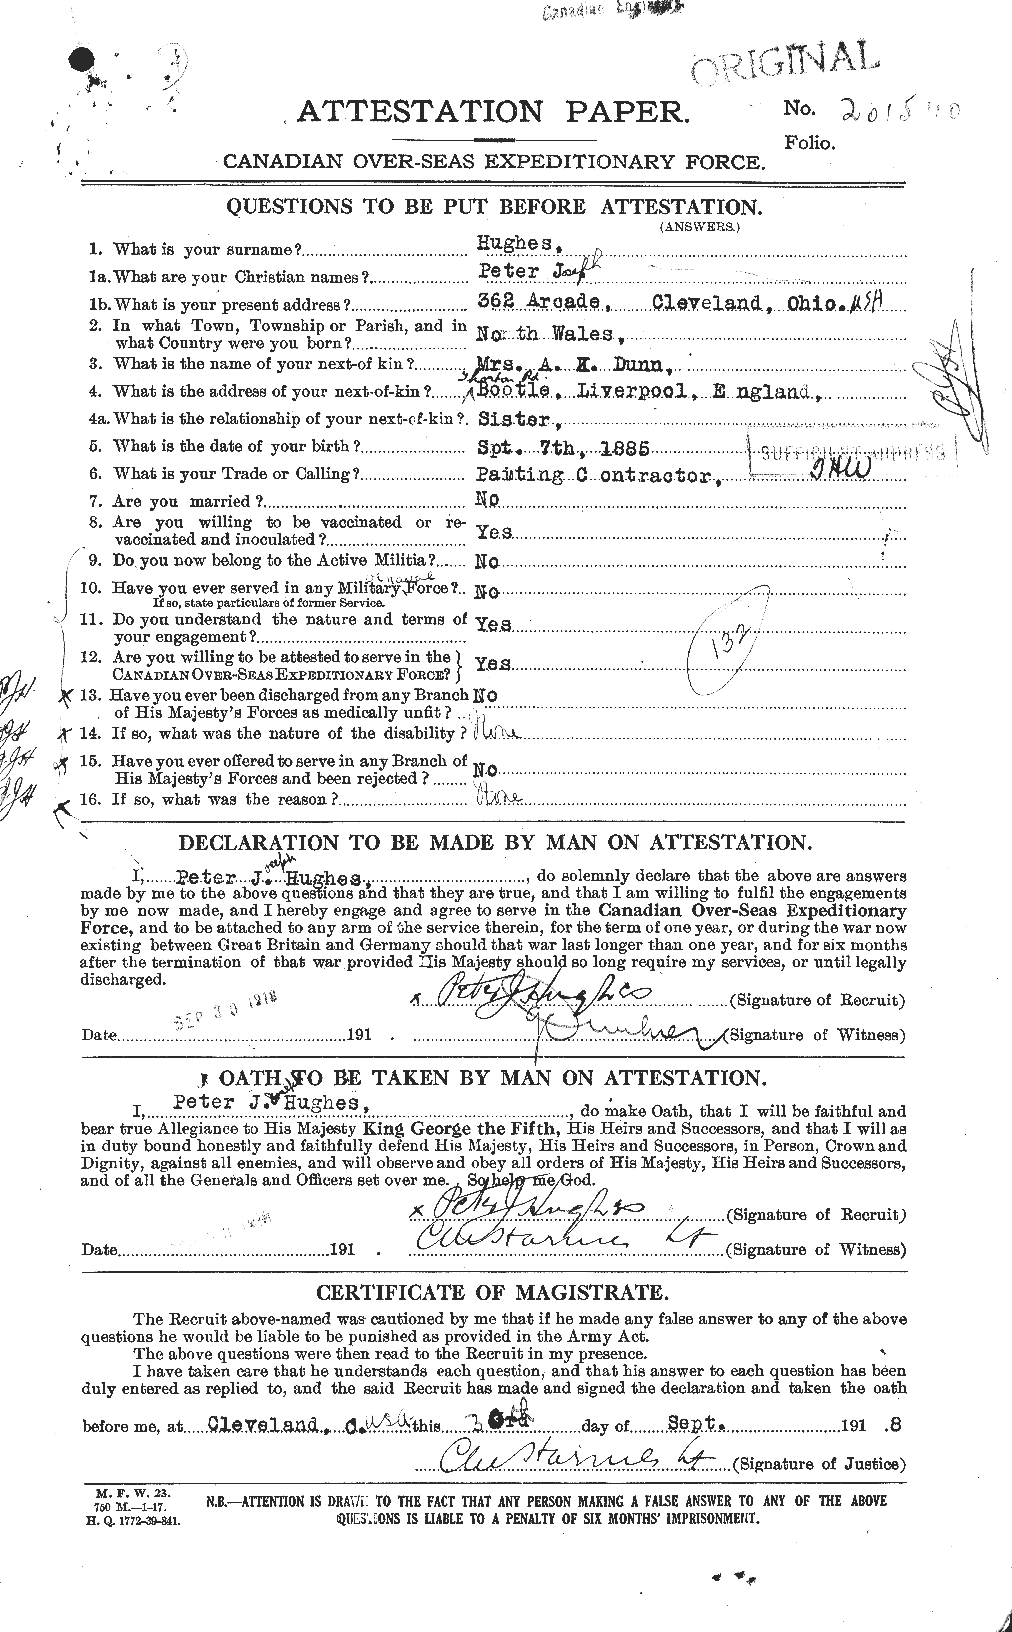 Personnel Records of the First World War - CEF 404168a